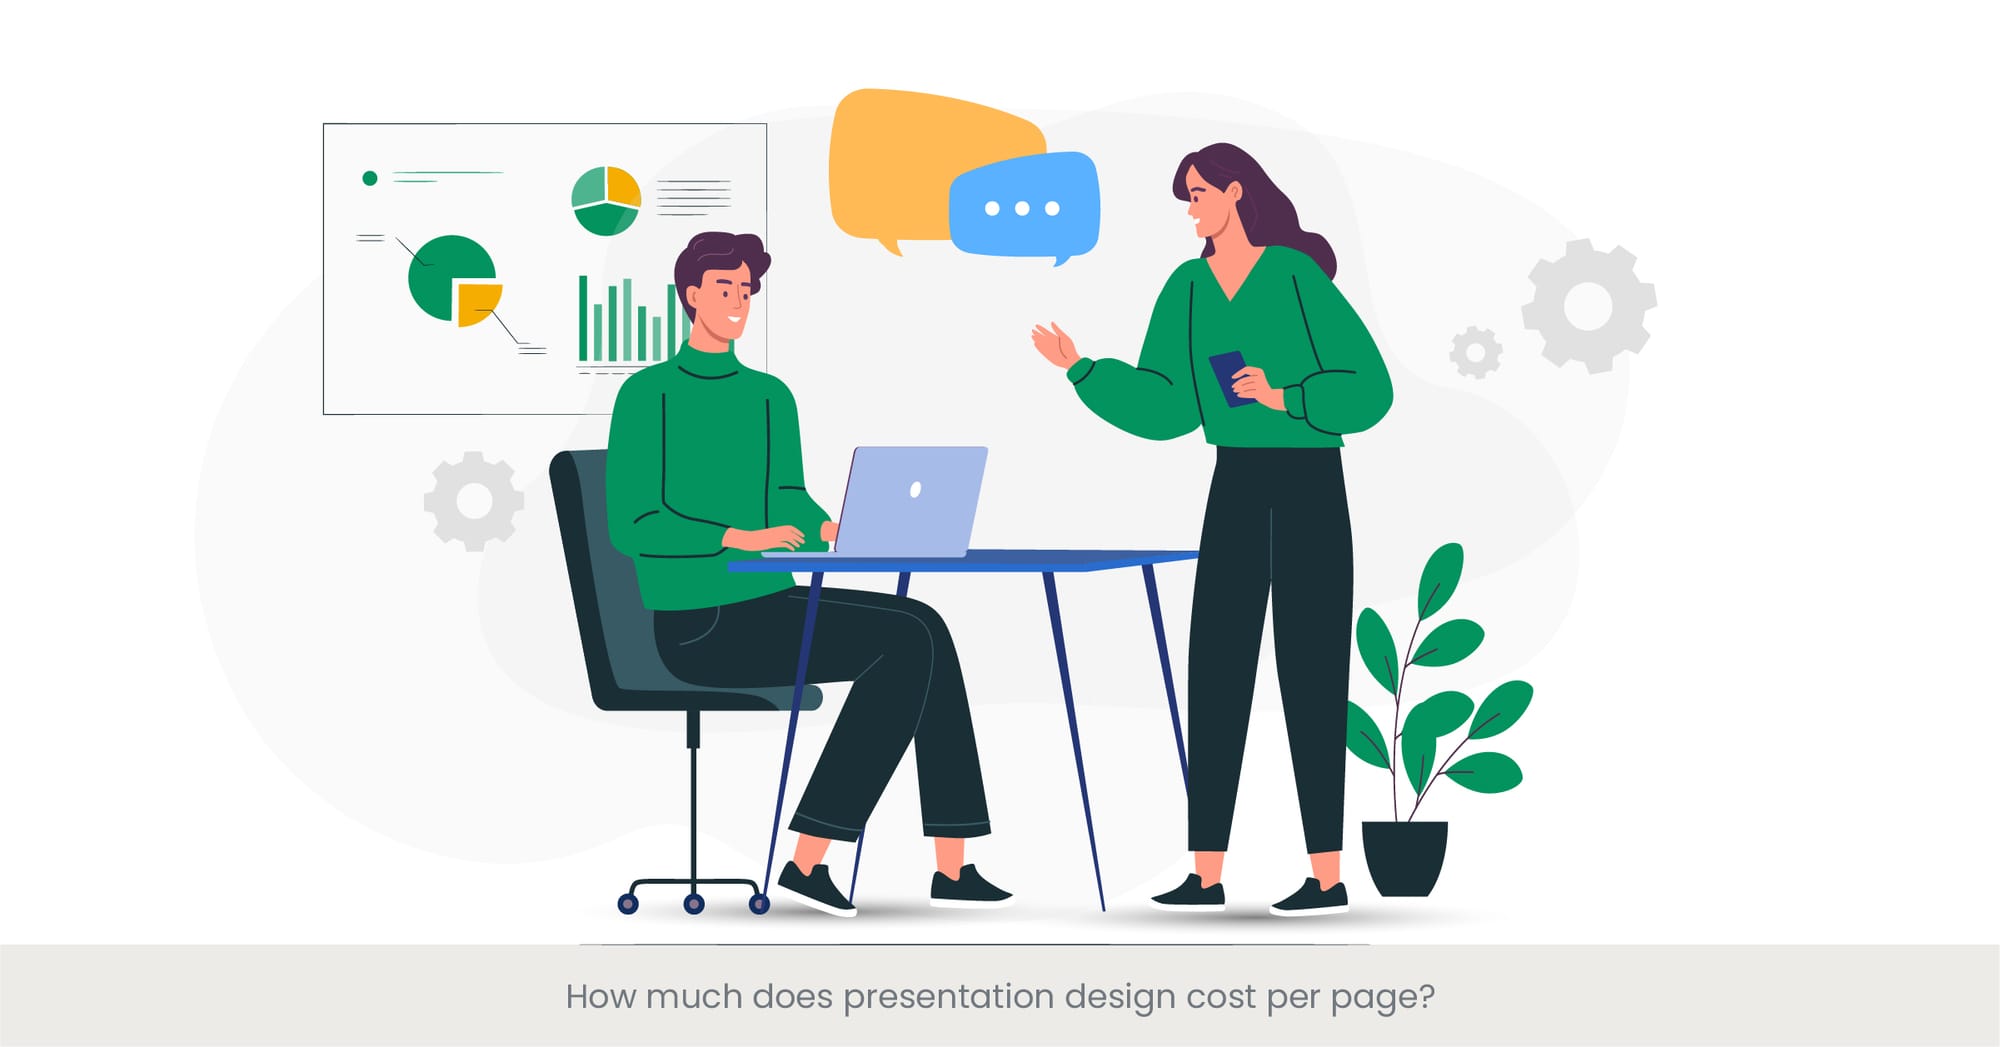 How much does presentation design cost per page